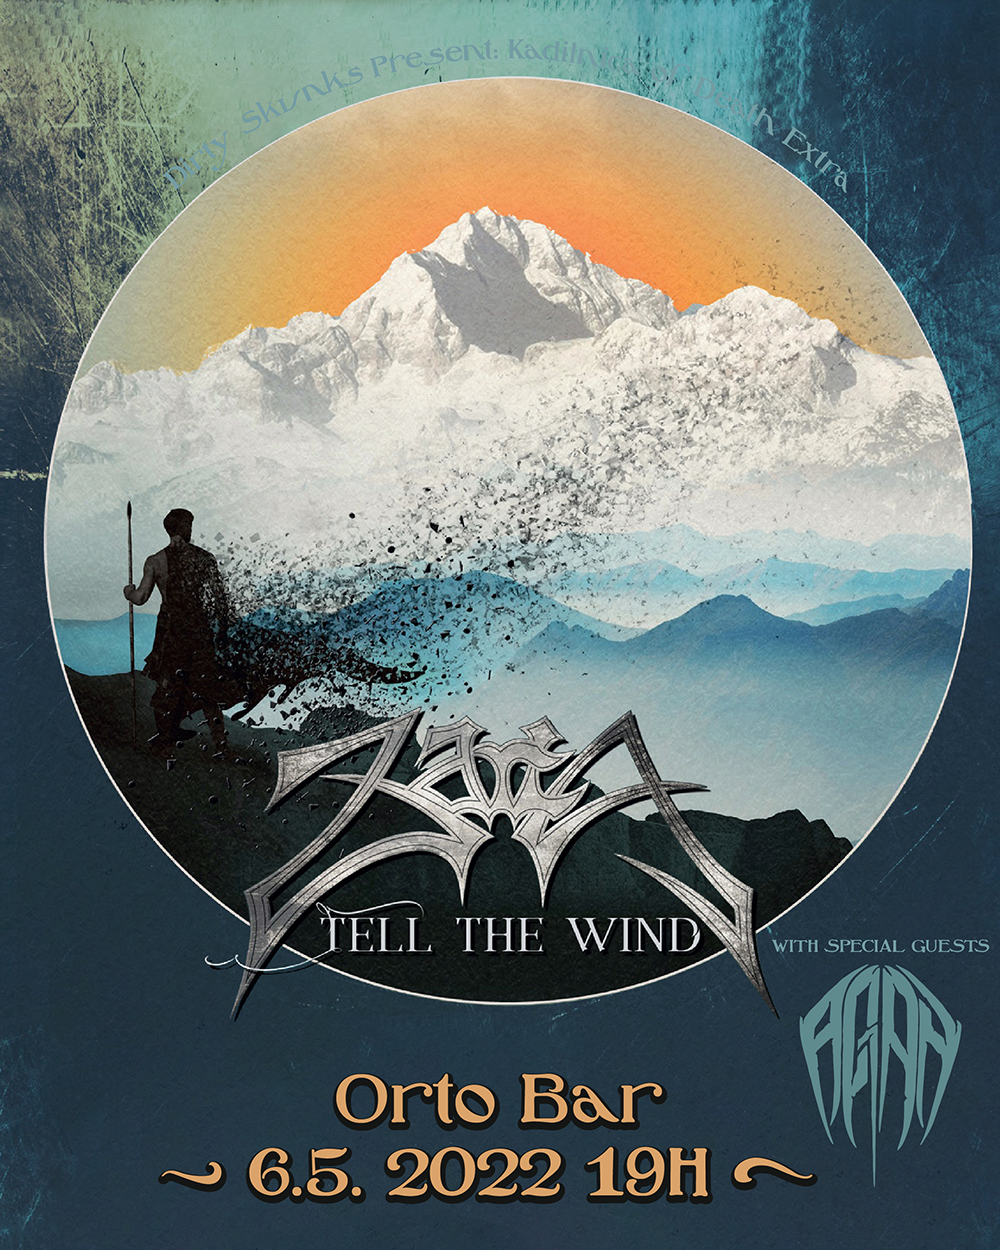 06.05.2022 - Kadilnica of Death Extra: Zaria (Slo) ‘Tell the Wind’ Release Show + special guests Agan (Slo) @ Orto Bar, Ljubljana